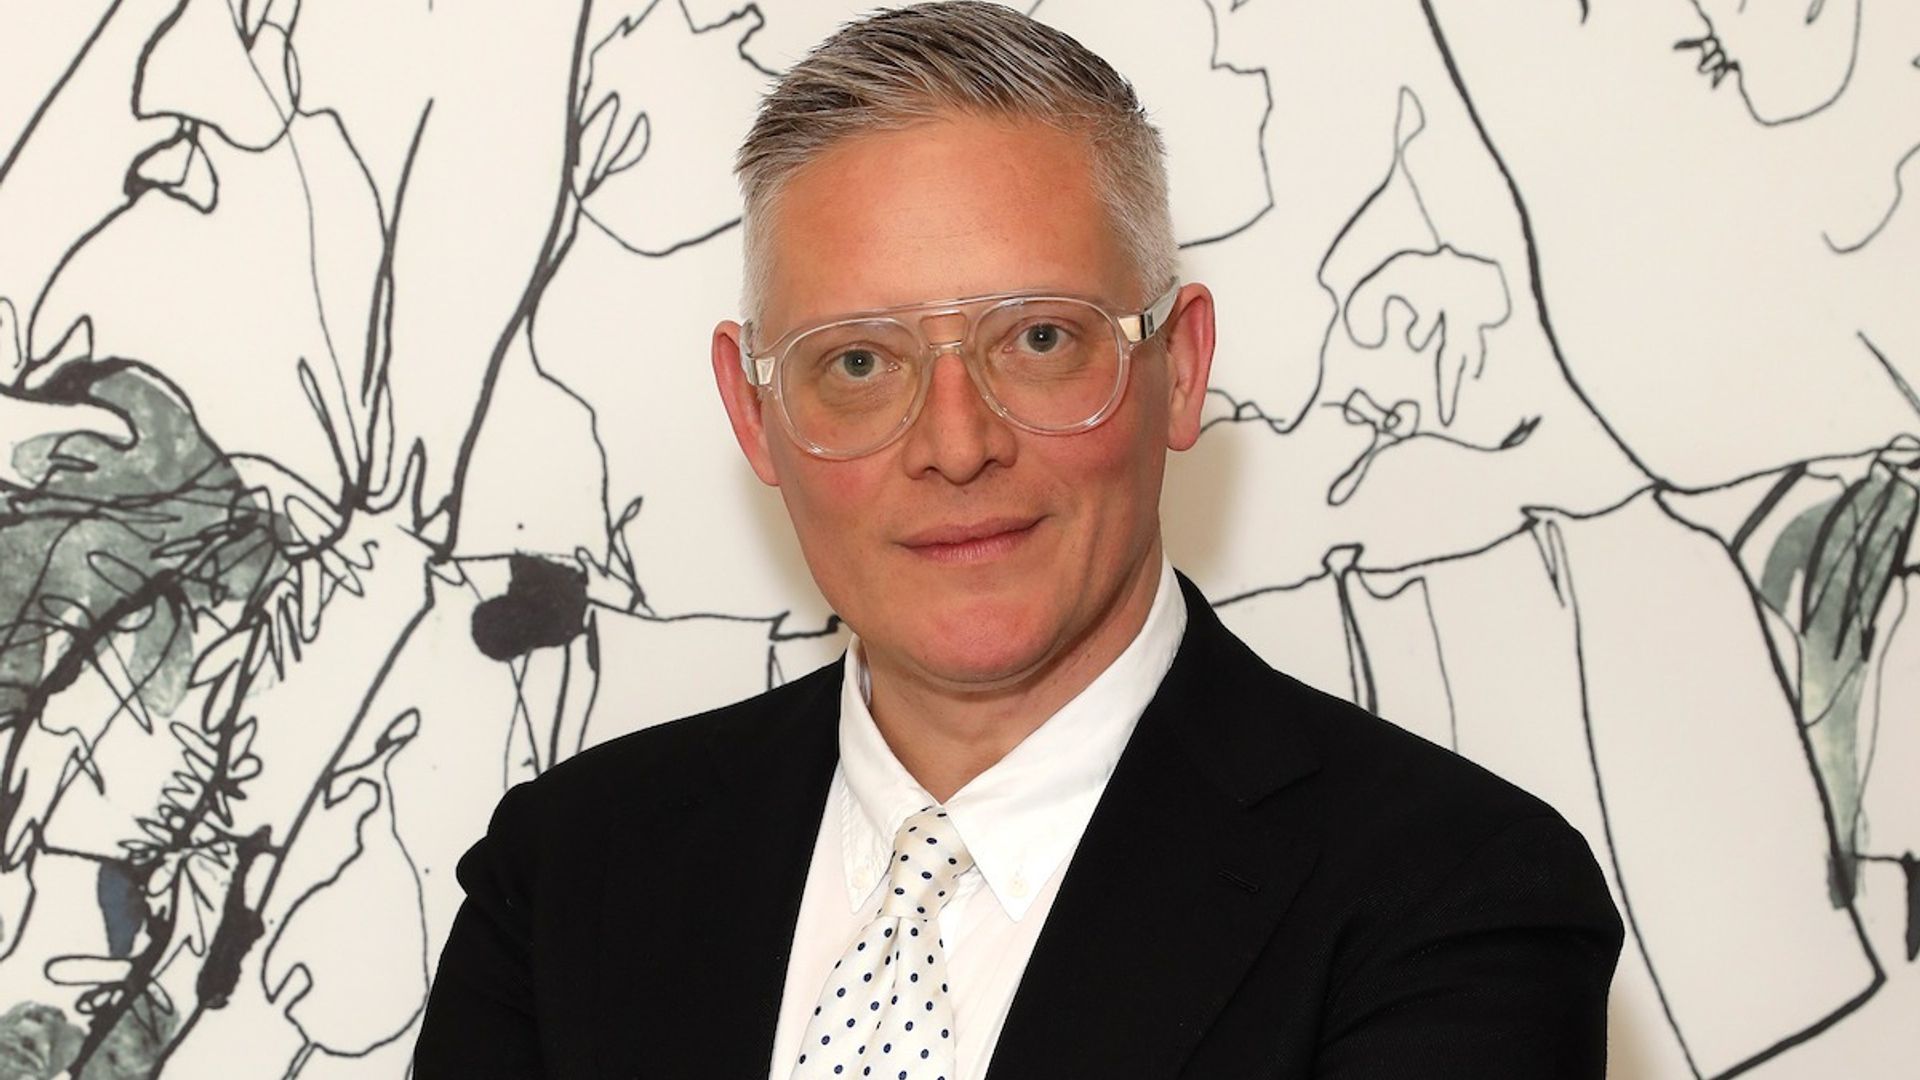 Fashion designer Giles Deacon launches workwear range we weren't expecting - in the best way